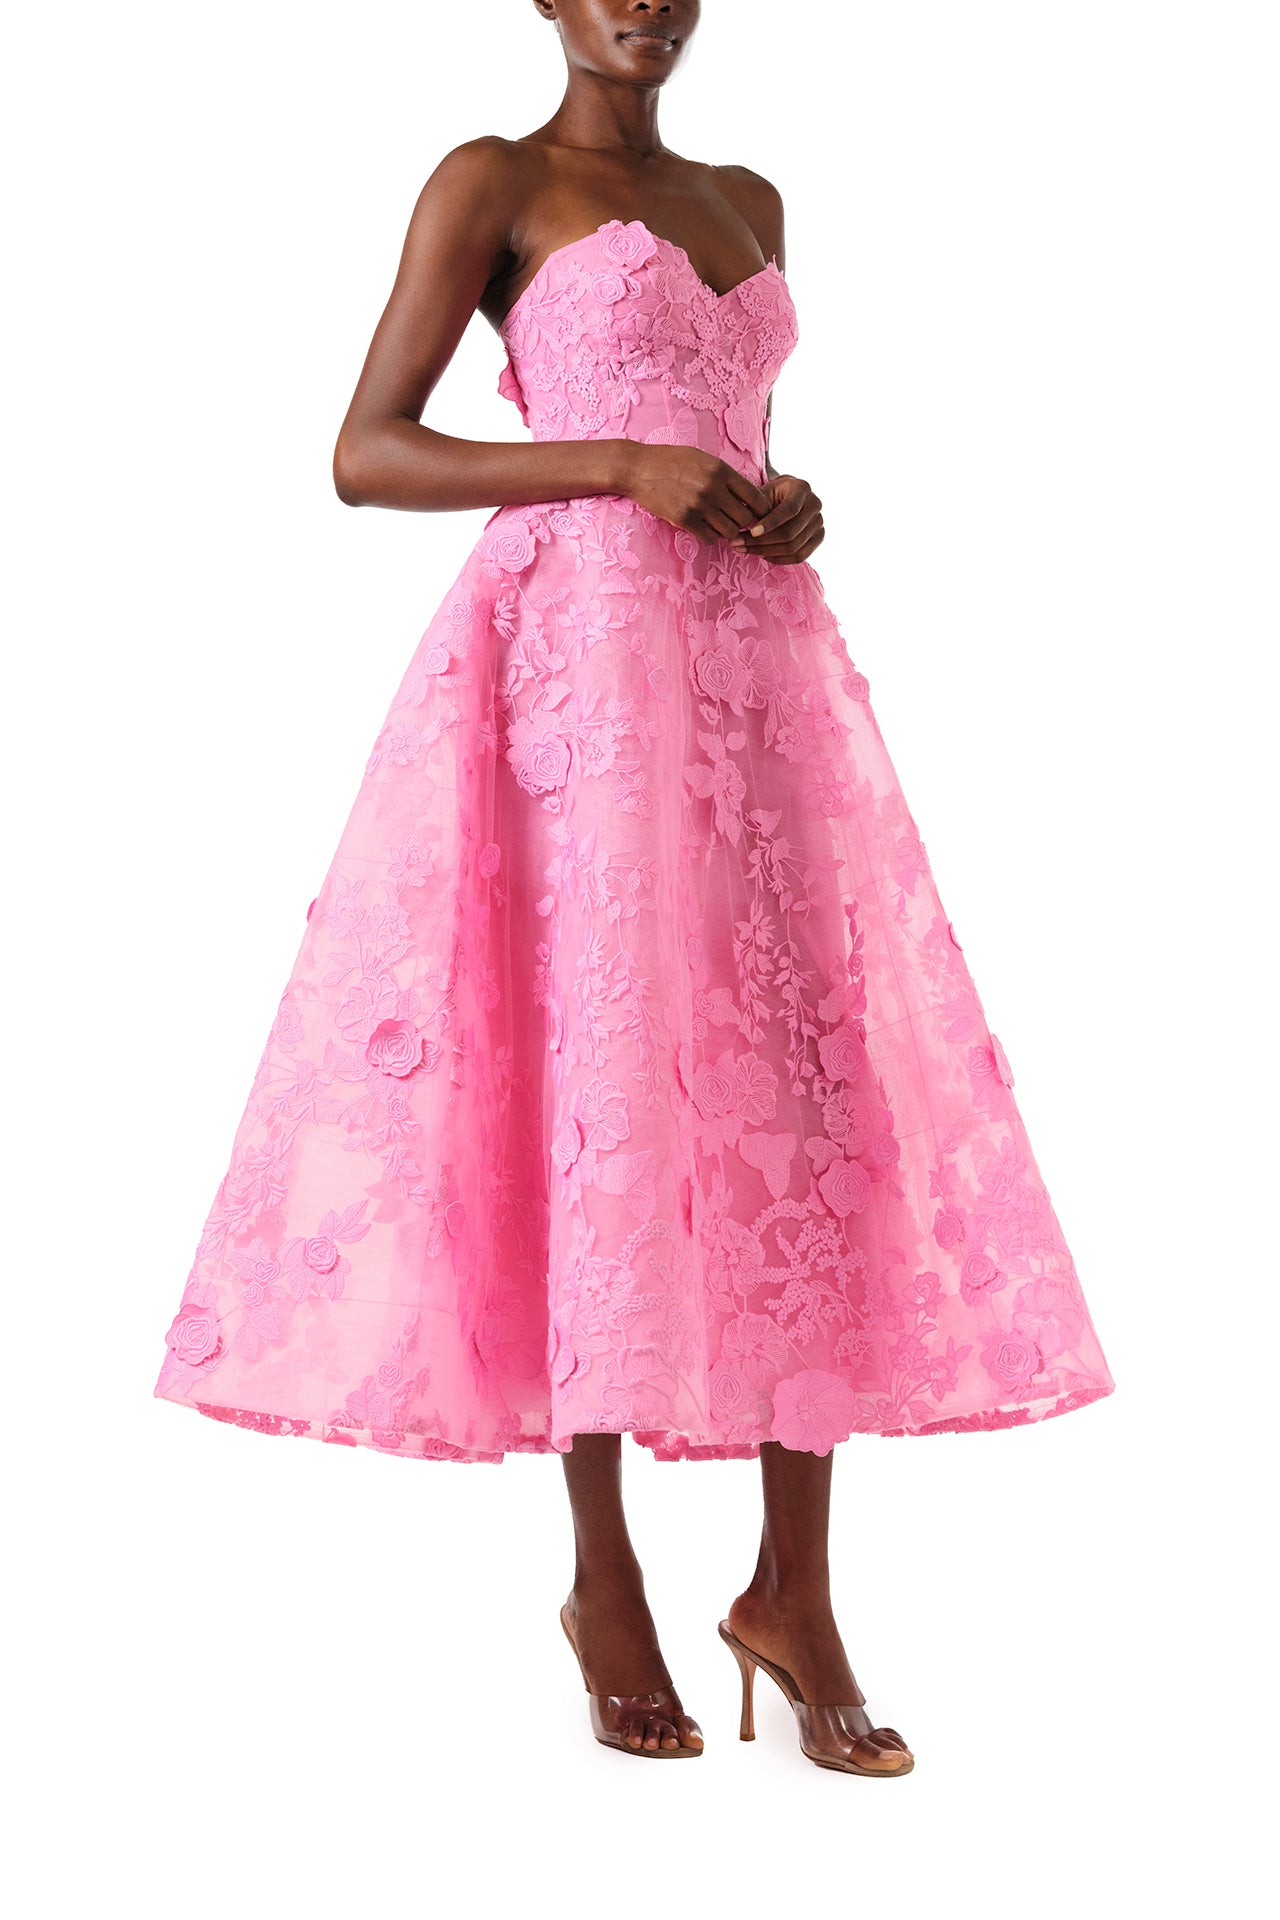 Monique Lhuillier Fall 2024 tea-length, strapless dress in pink 3D lace with full skirt and fitted sweetheart bodice - right side.